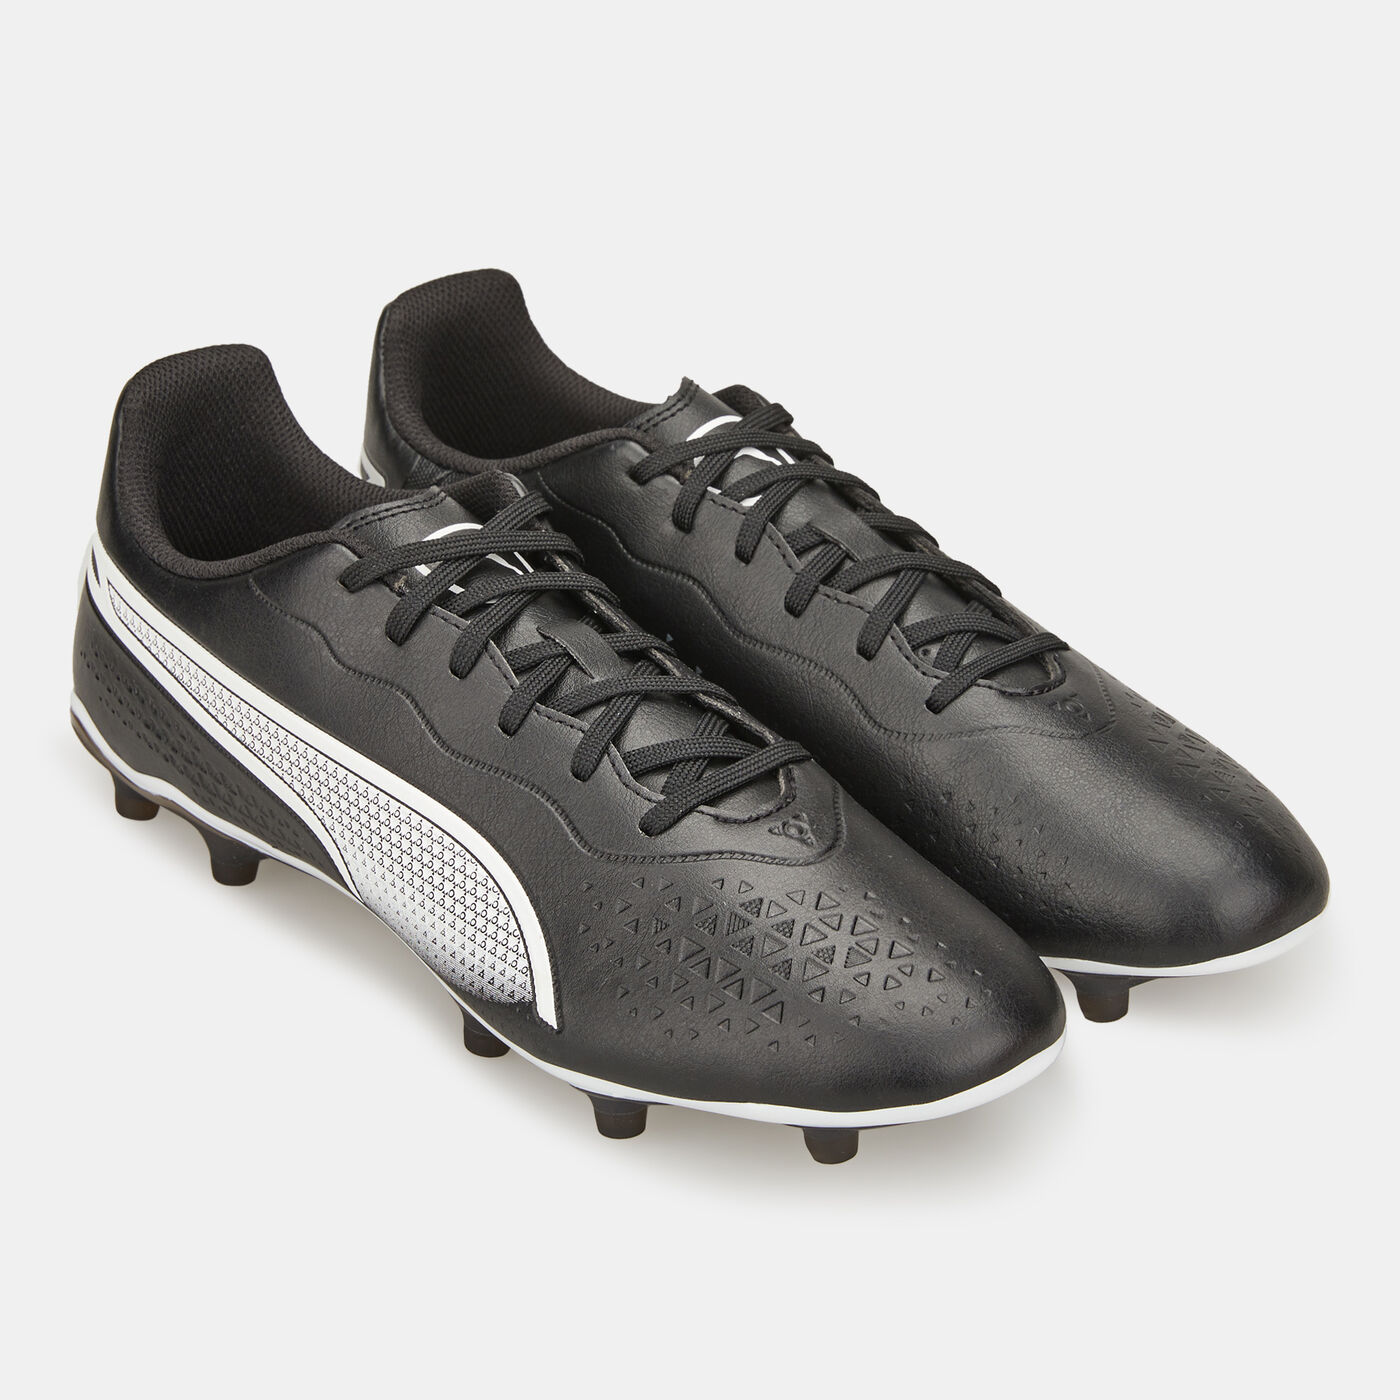 Men's King Match Firm Ground/Artificial Ground Football Shoes